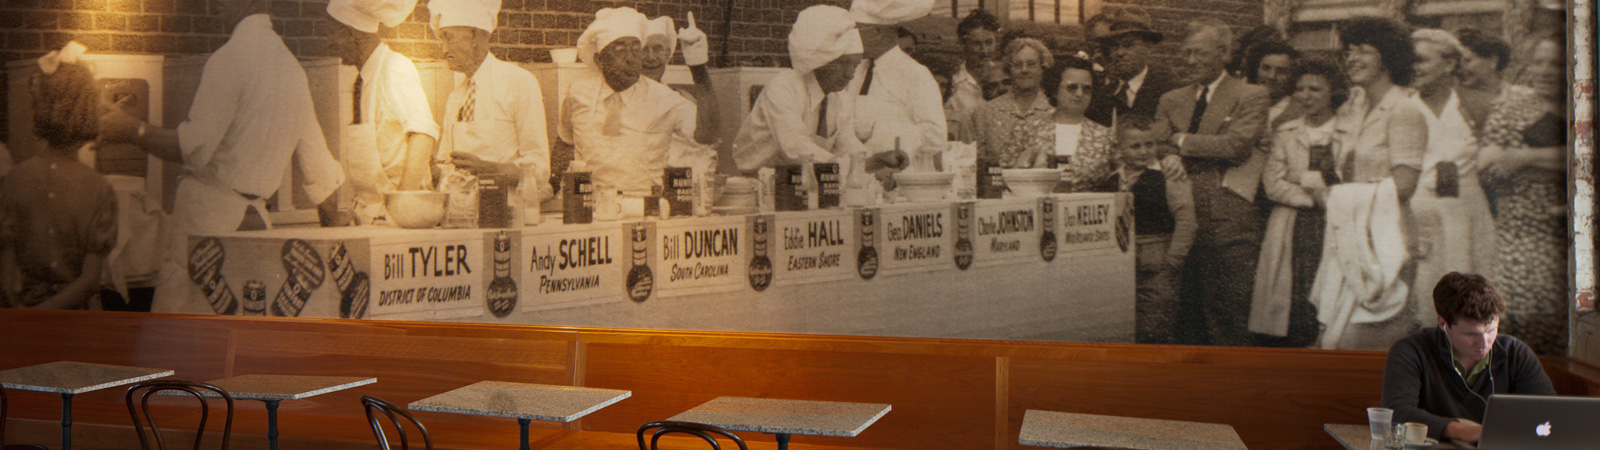 Interior of Seven Stars Bakery wall showing an old black and white photo of bakers in a line.